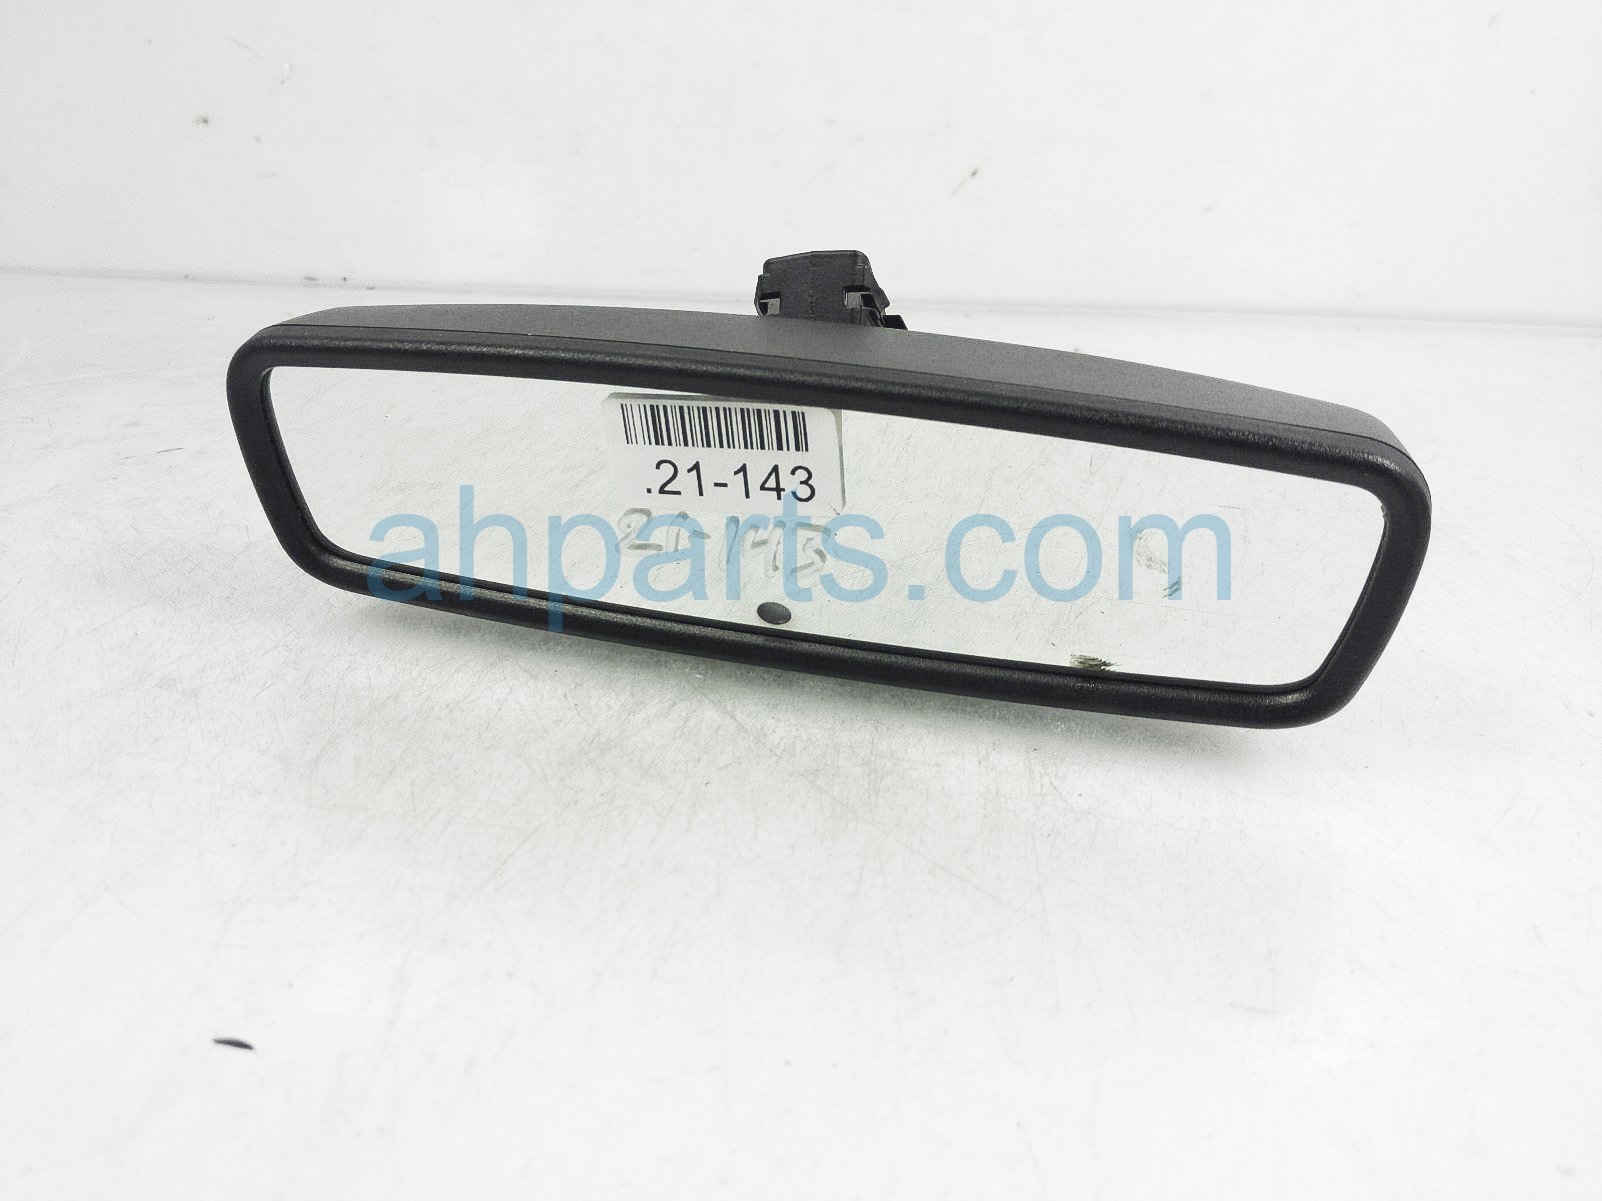 $35 Ford INSIDE / INTERIOR REAR VIEW MIRROR